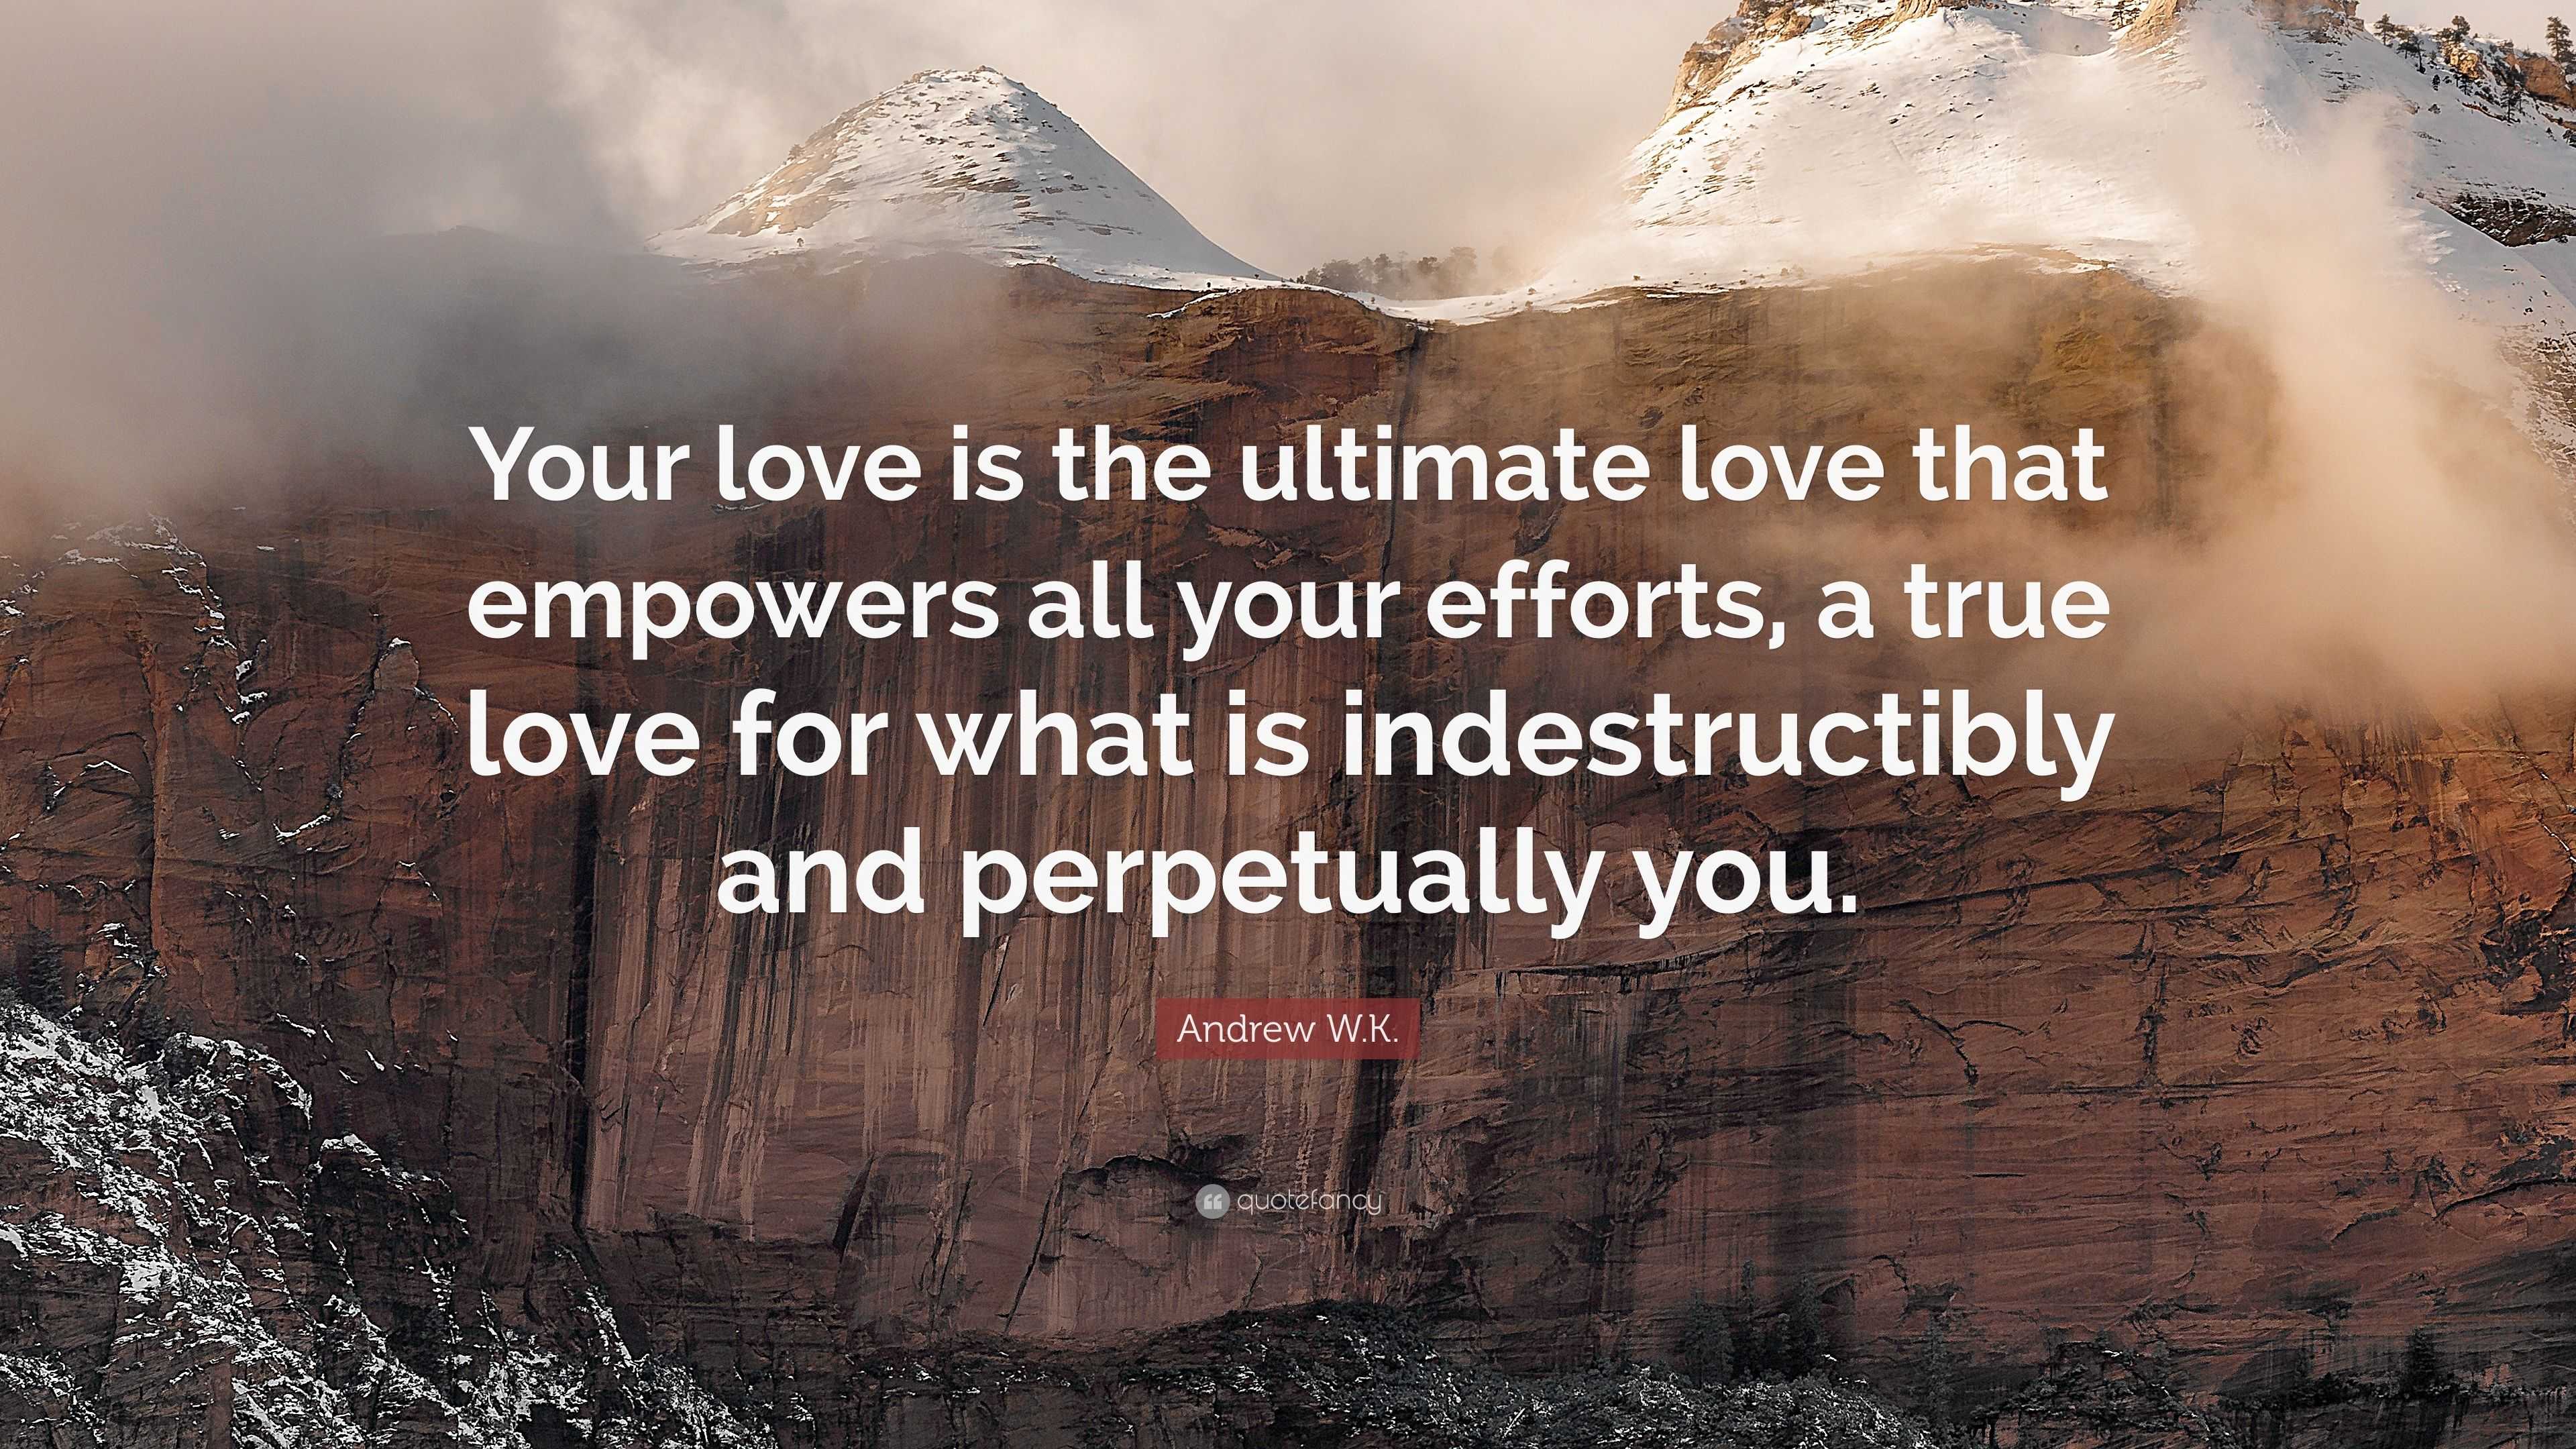 Andrew W.K. Quote: “Your love is the ultimate love that empowers all ...